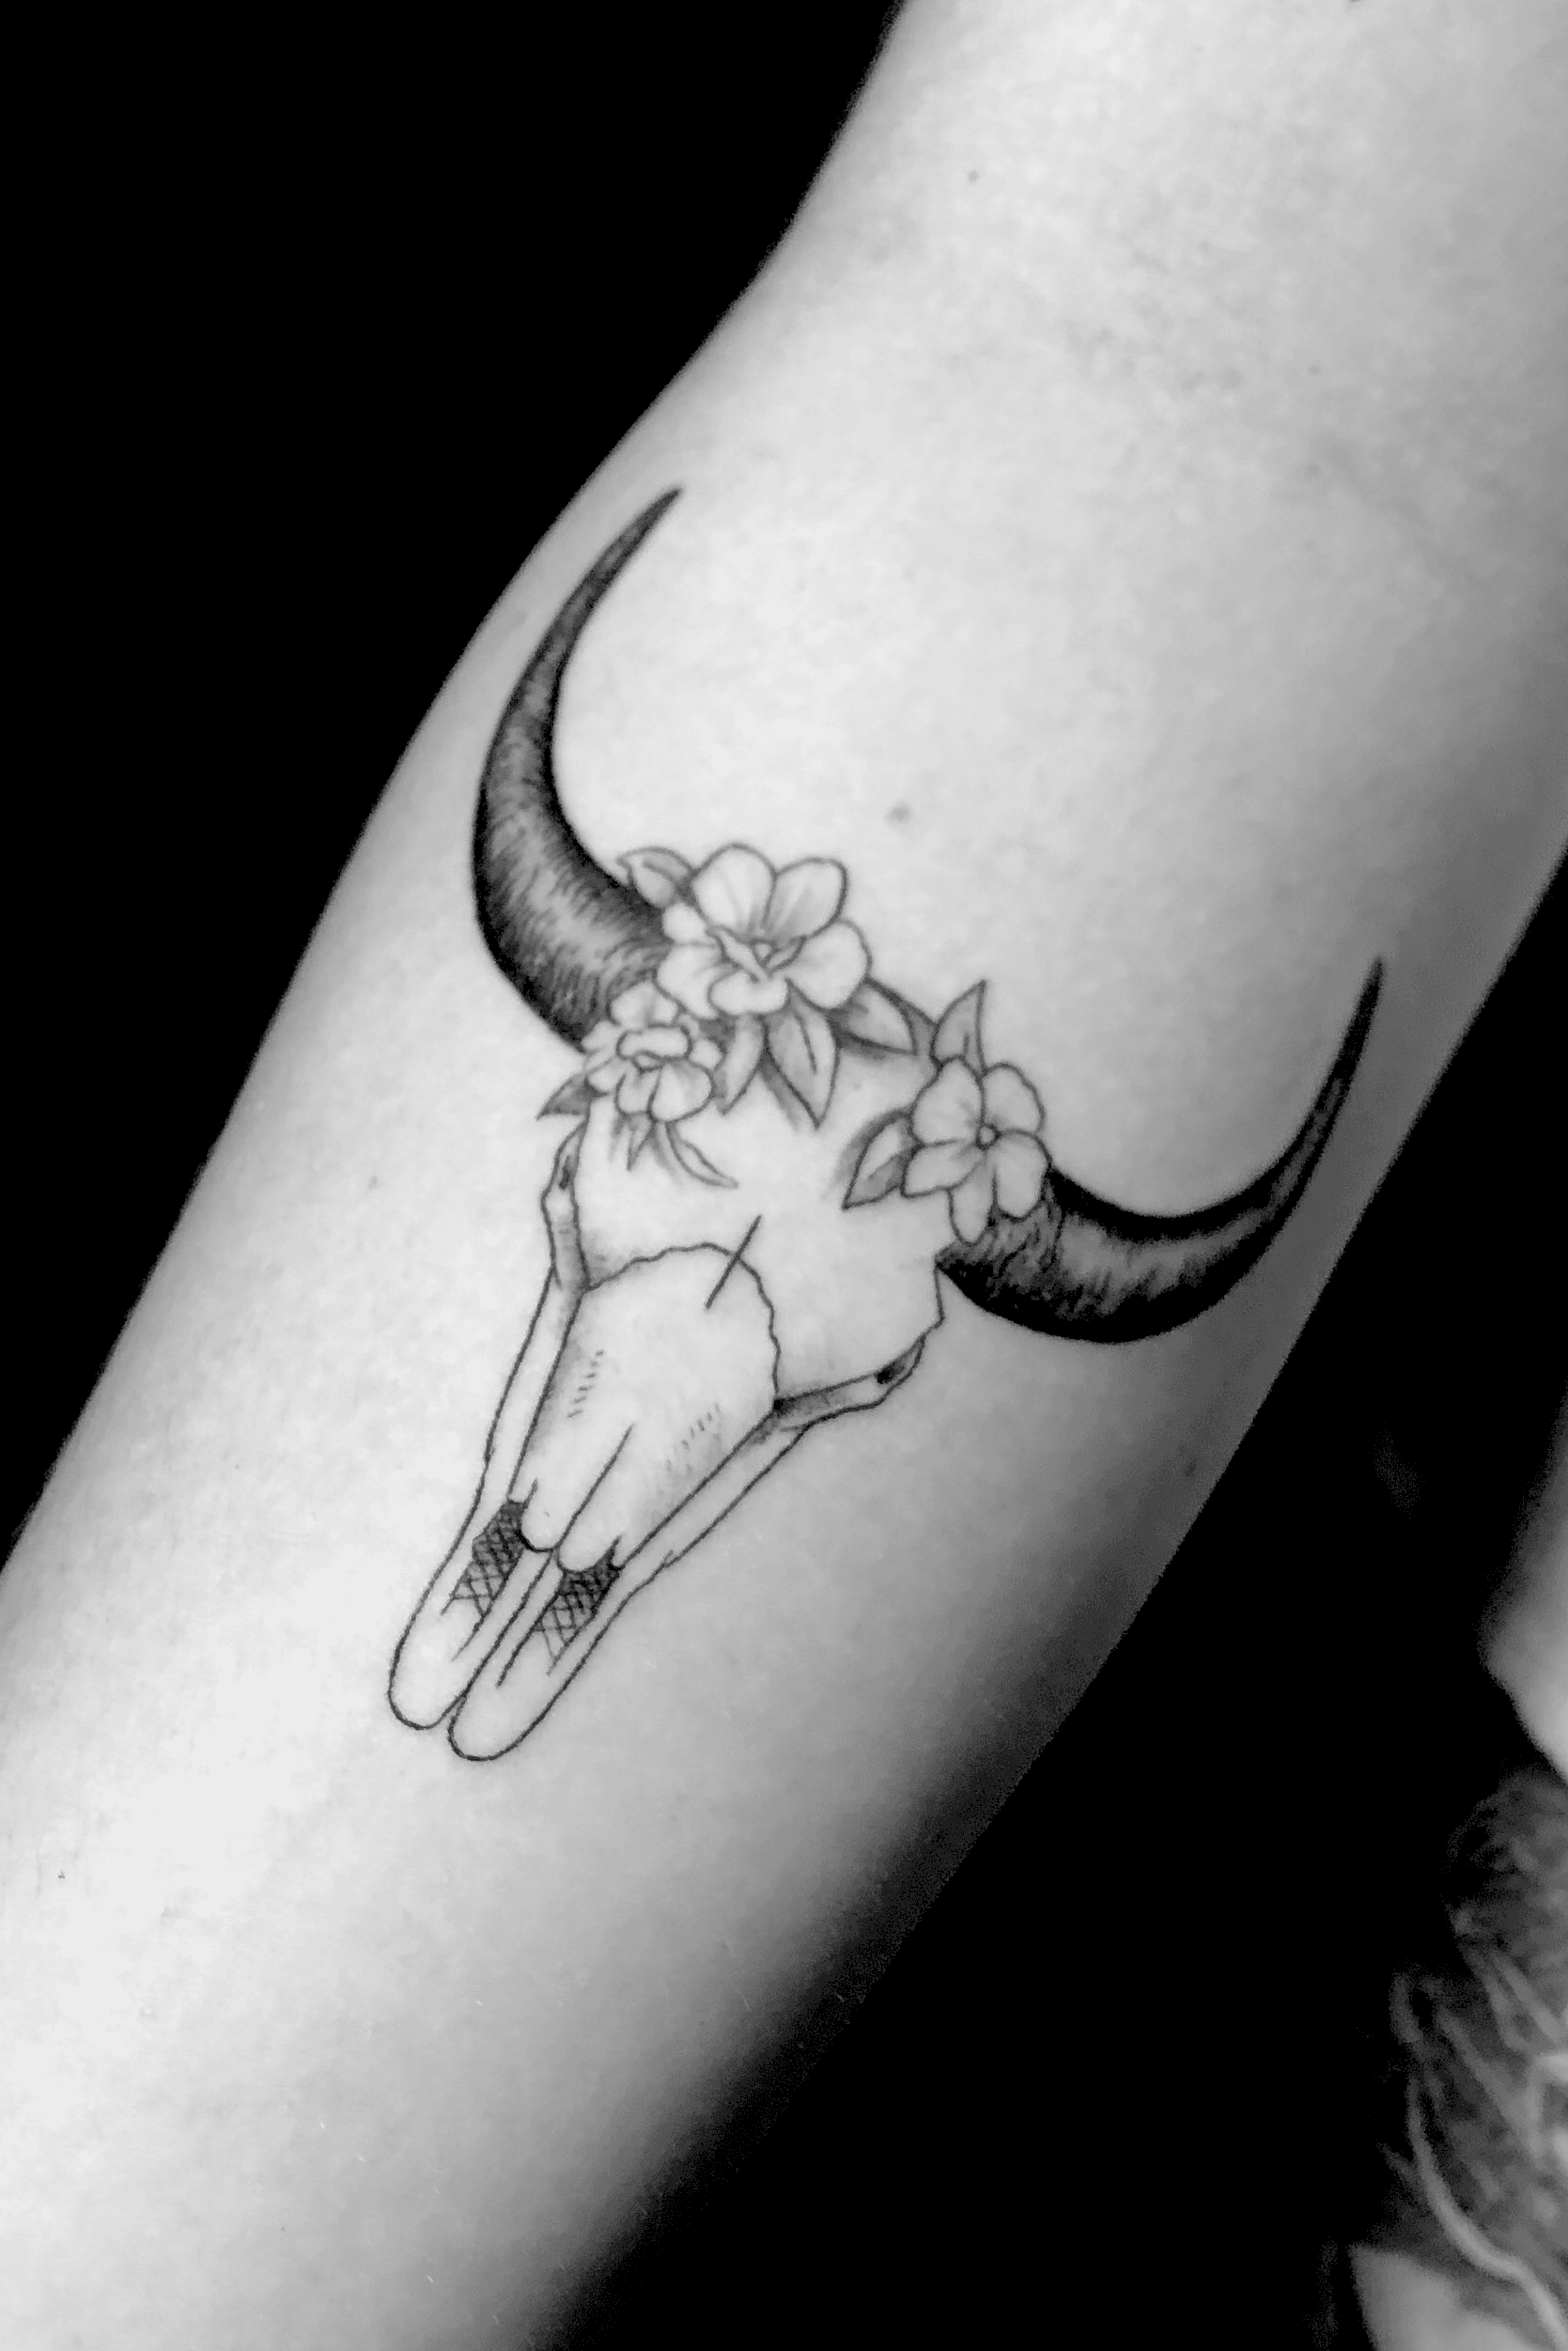 Freakshow Tattoo  This cute little cow tattoo was done by Casey Like and  share csu csurams focosnaps fortcollins foco noco  coloradostateuniversity colorado universityofwyoming UW tattoo  piercing nocopiercings nocotattoos 